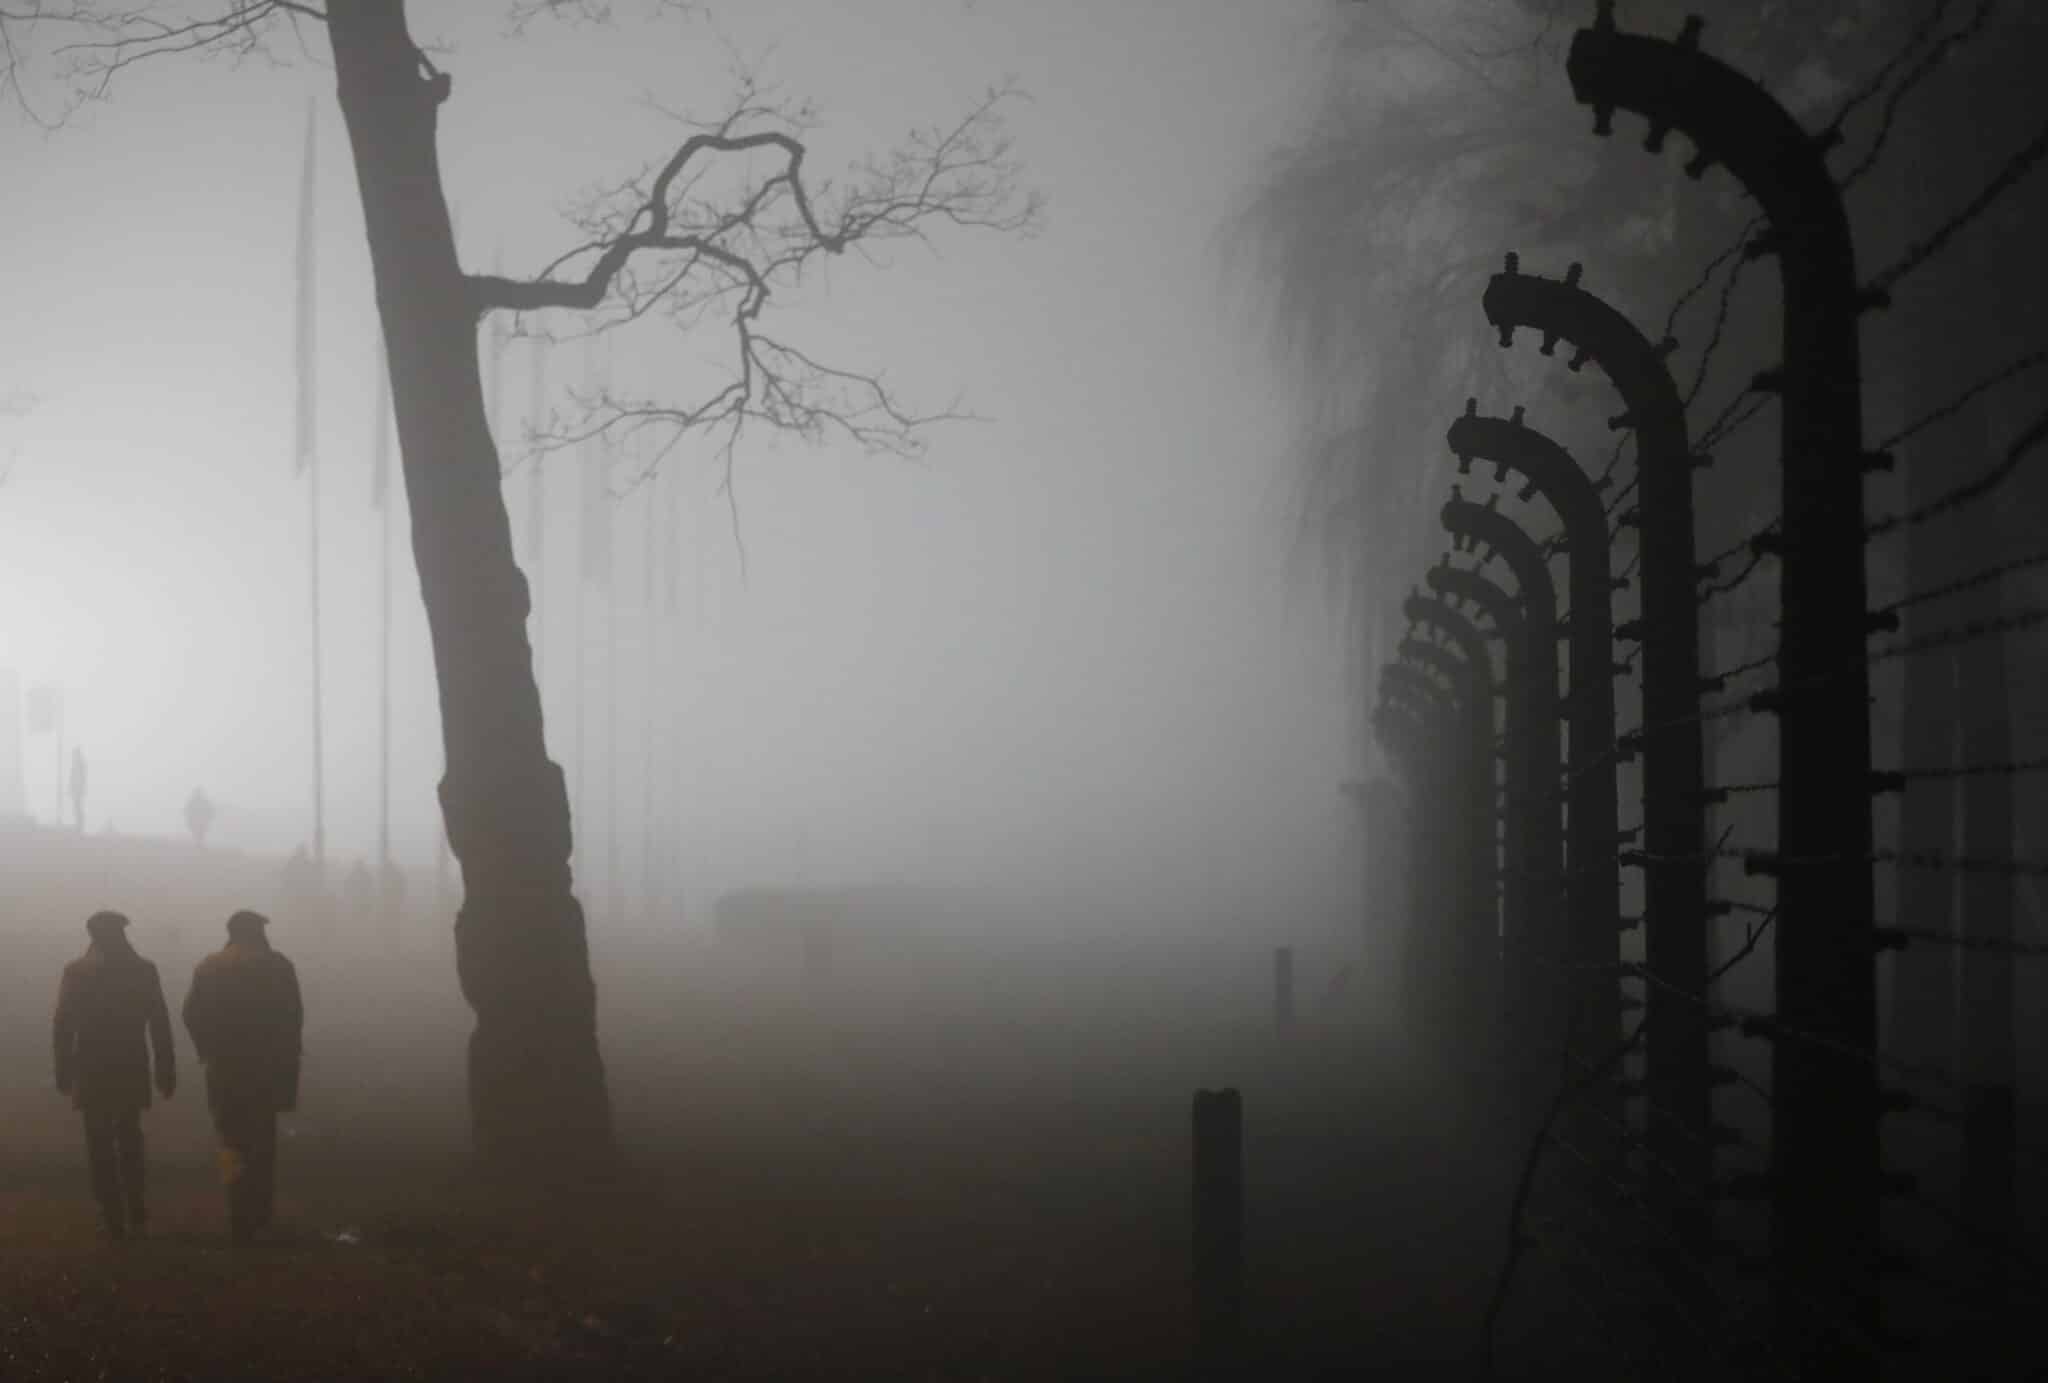 People walk in dense fog in the Auschwitz-Birkenau Nazi death camp during ceremonies in late January marking the 73rd anniversary of the liberation of the camp and International Holocaust Victims Remembrance Day in in Oswiecim, Poland. (CNS photo/Kacper Pempel, Reuters)